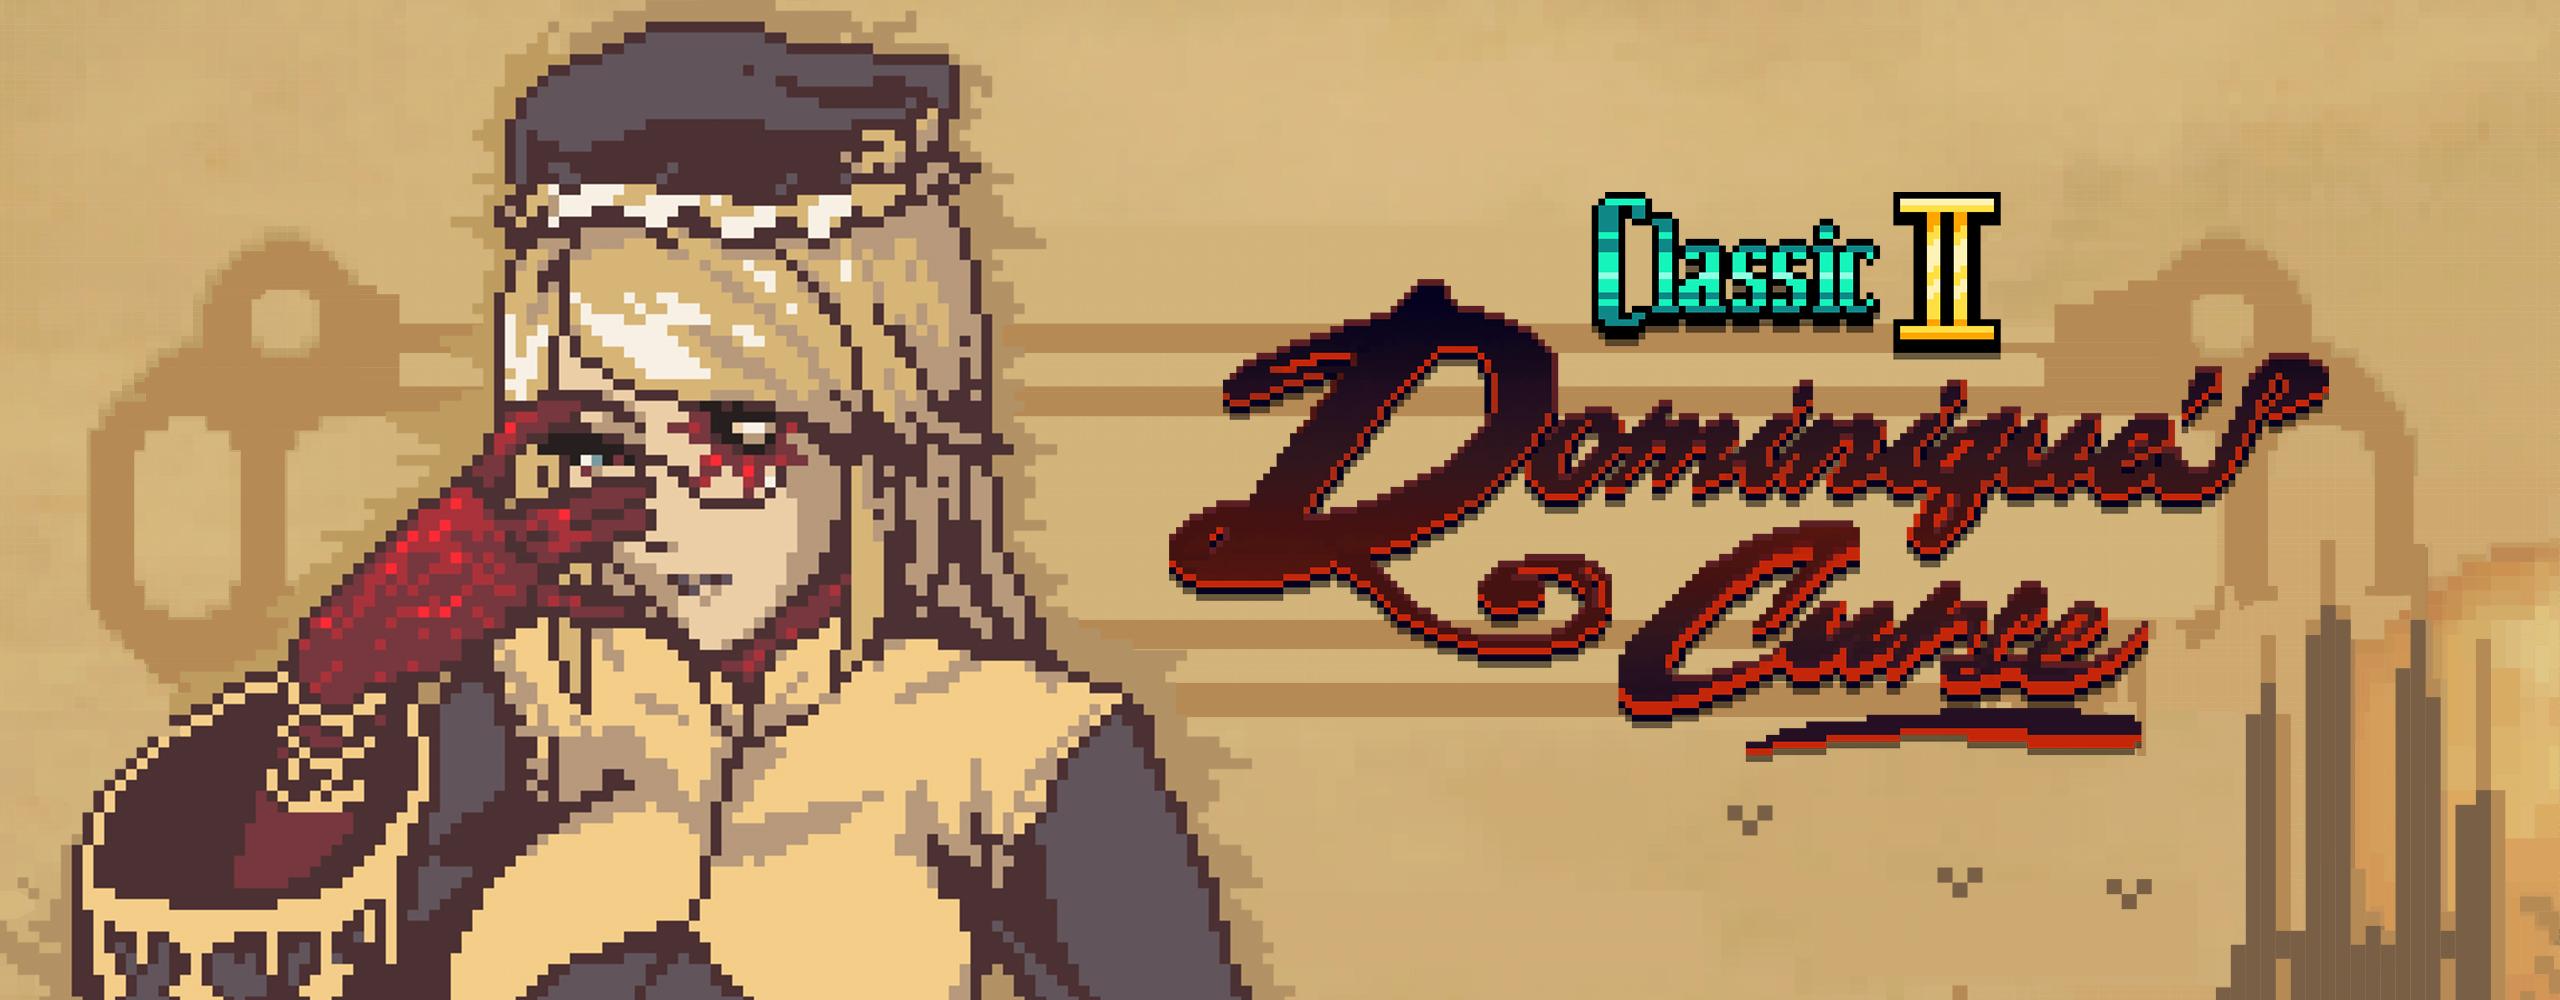 Classic II: Dominique’s Curse for Bloodstained: Ritual of the Night Available For Purchase Now!